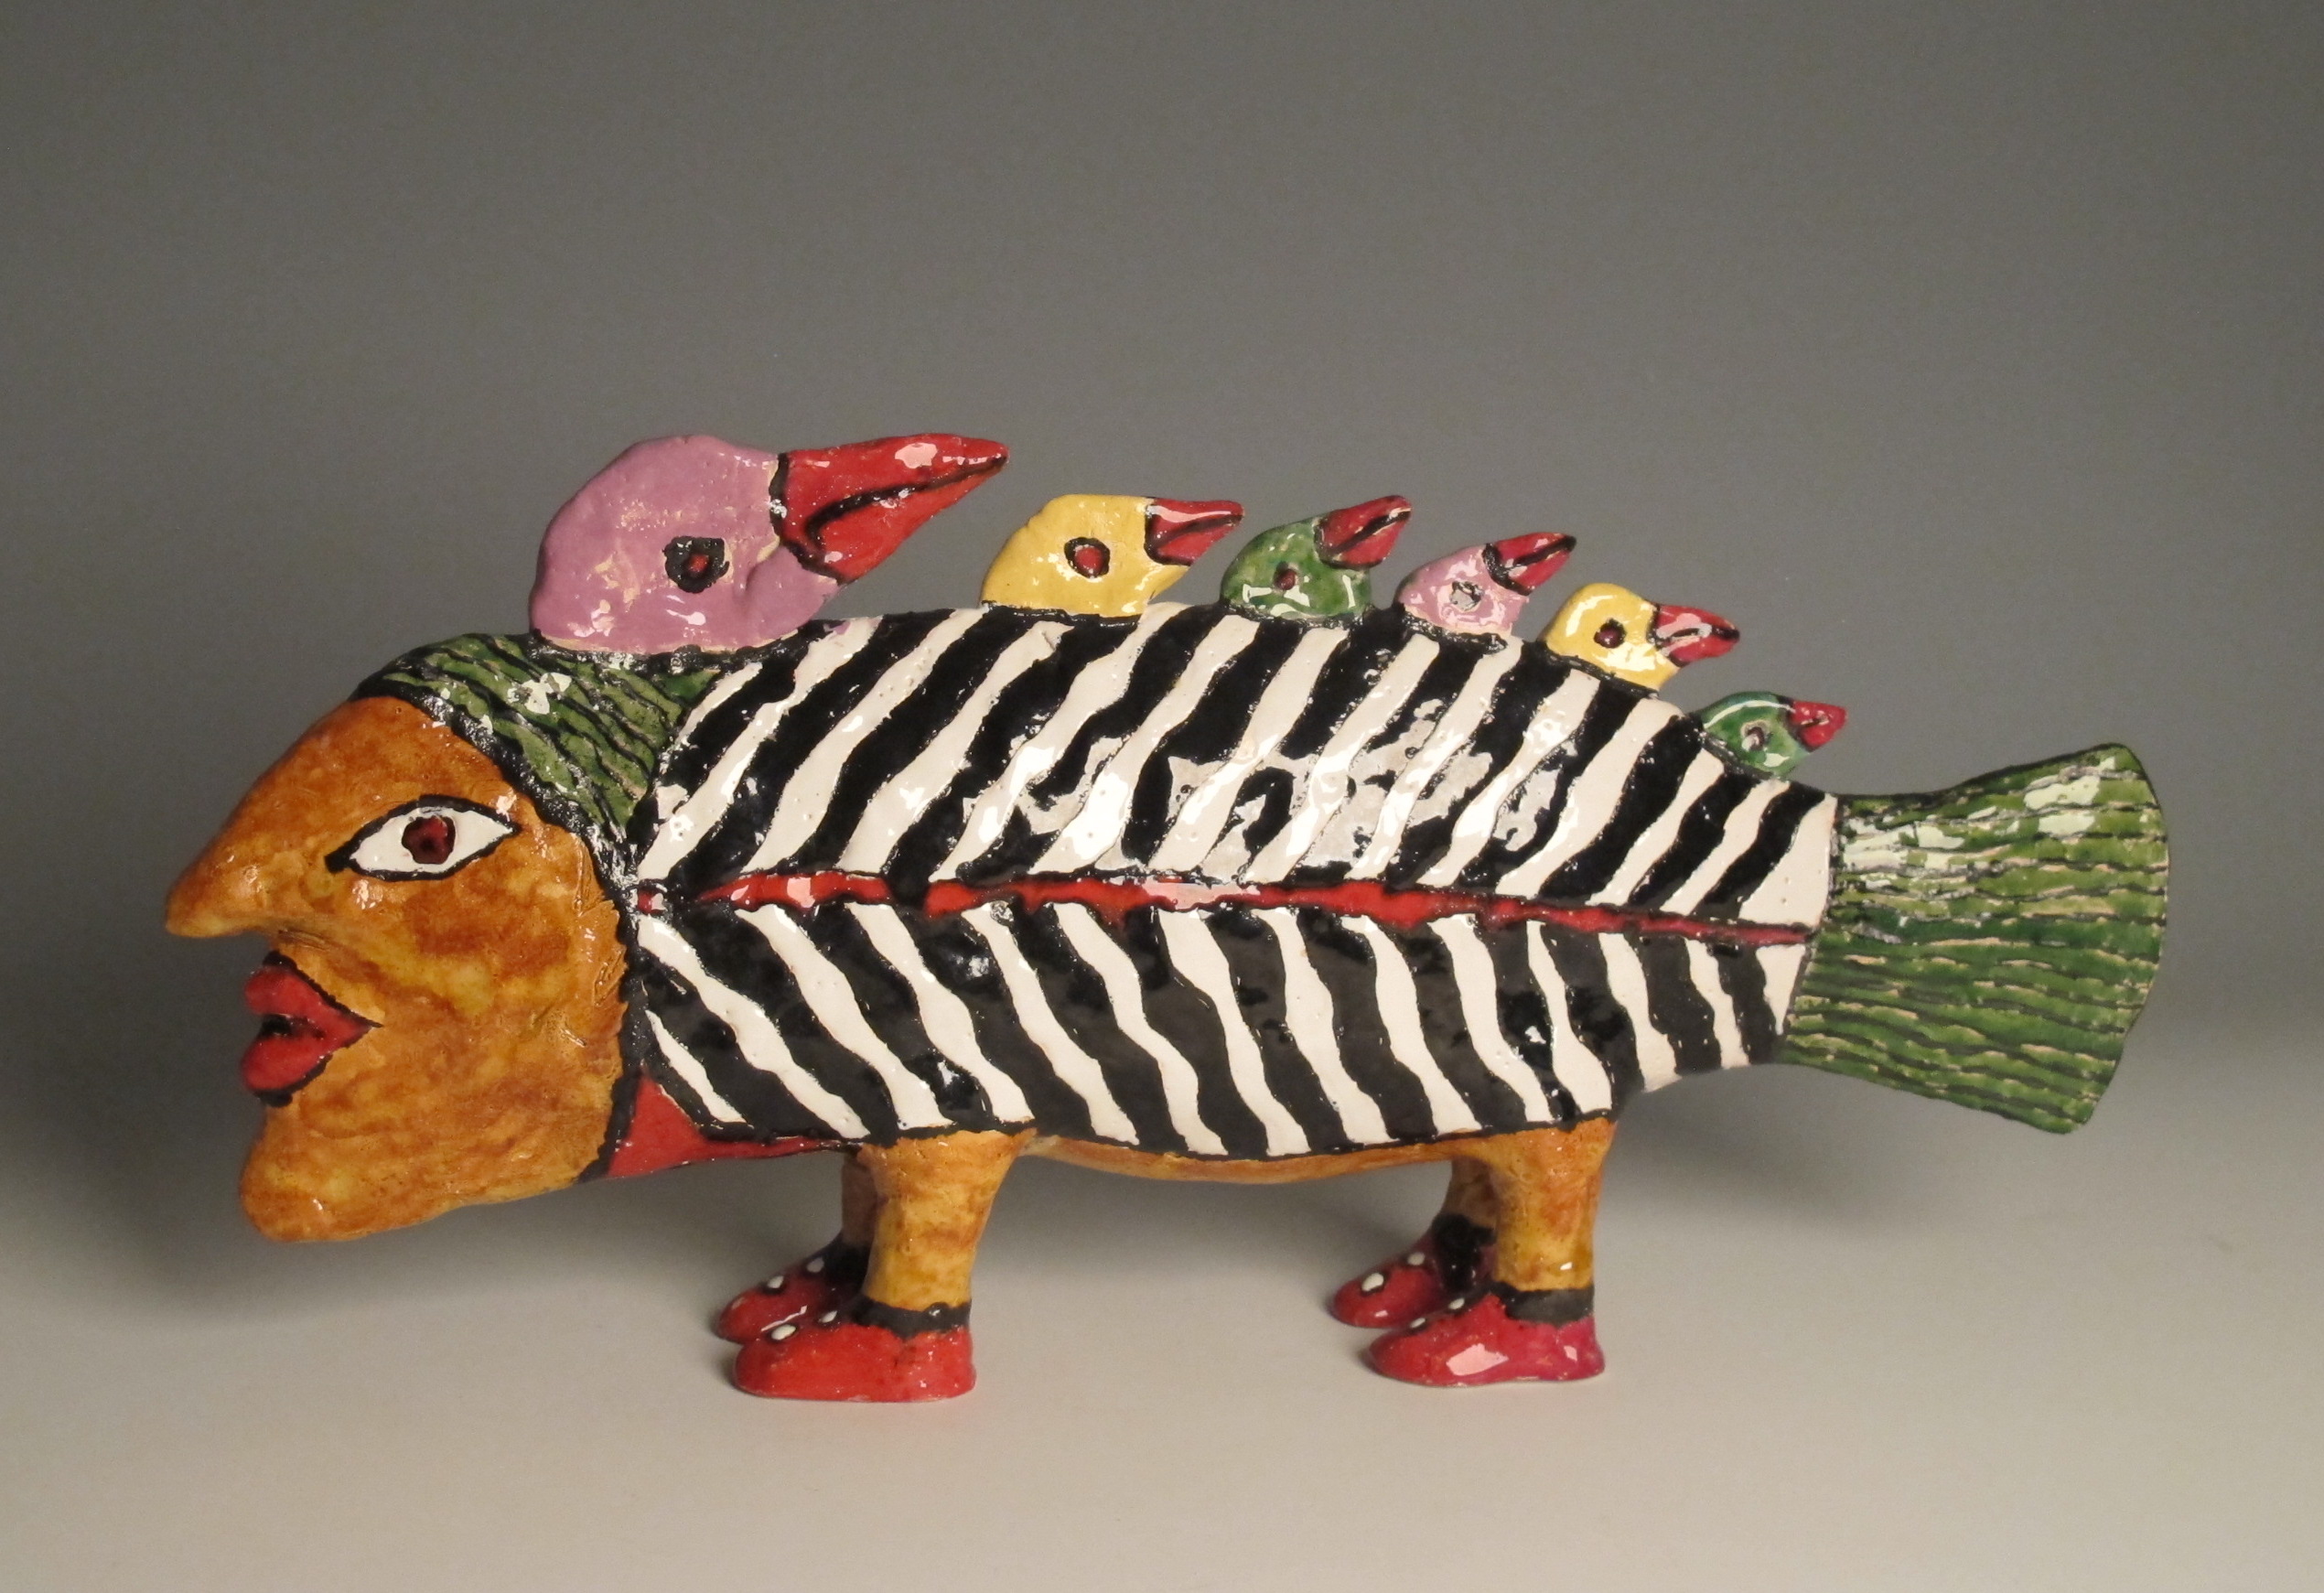 Nelli Isupov, "Fish" - a ceramic fish sculpture with a human face, feet in red shoes, and seven bird heads sticking out the top